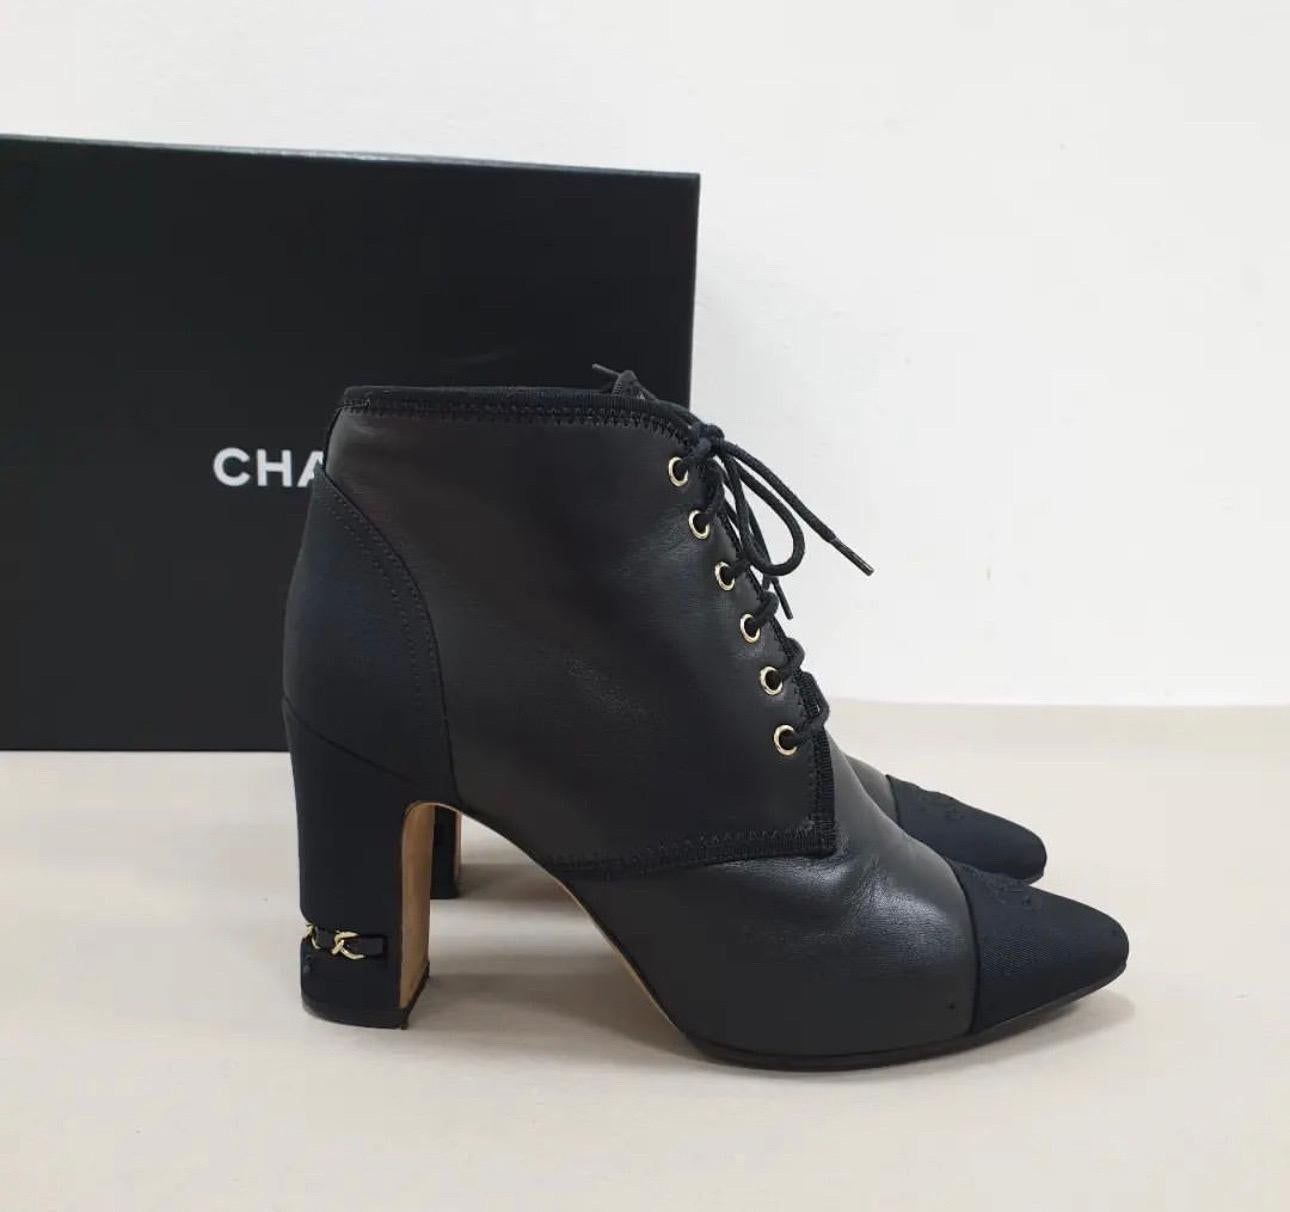 Chanel Leather Textile CC logo Heeled Booties In Good Condition For Sale In Krakow, PL